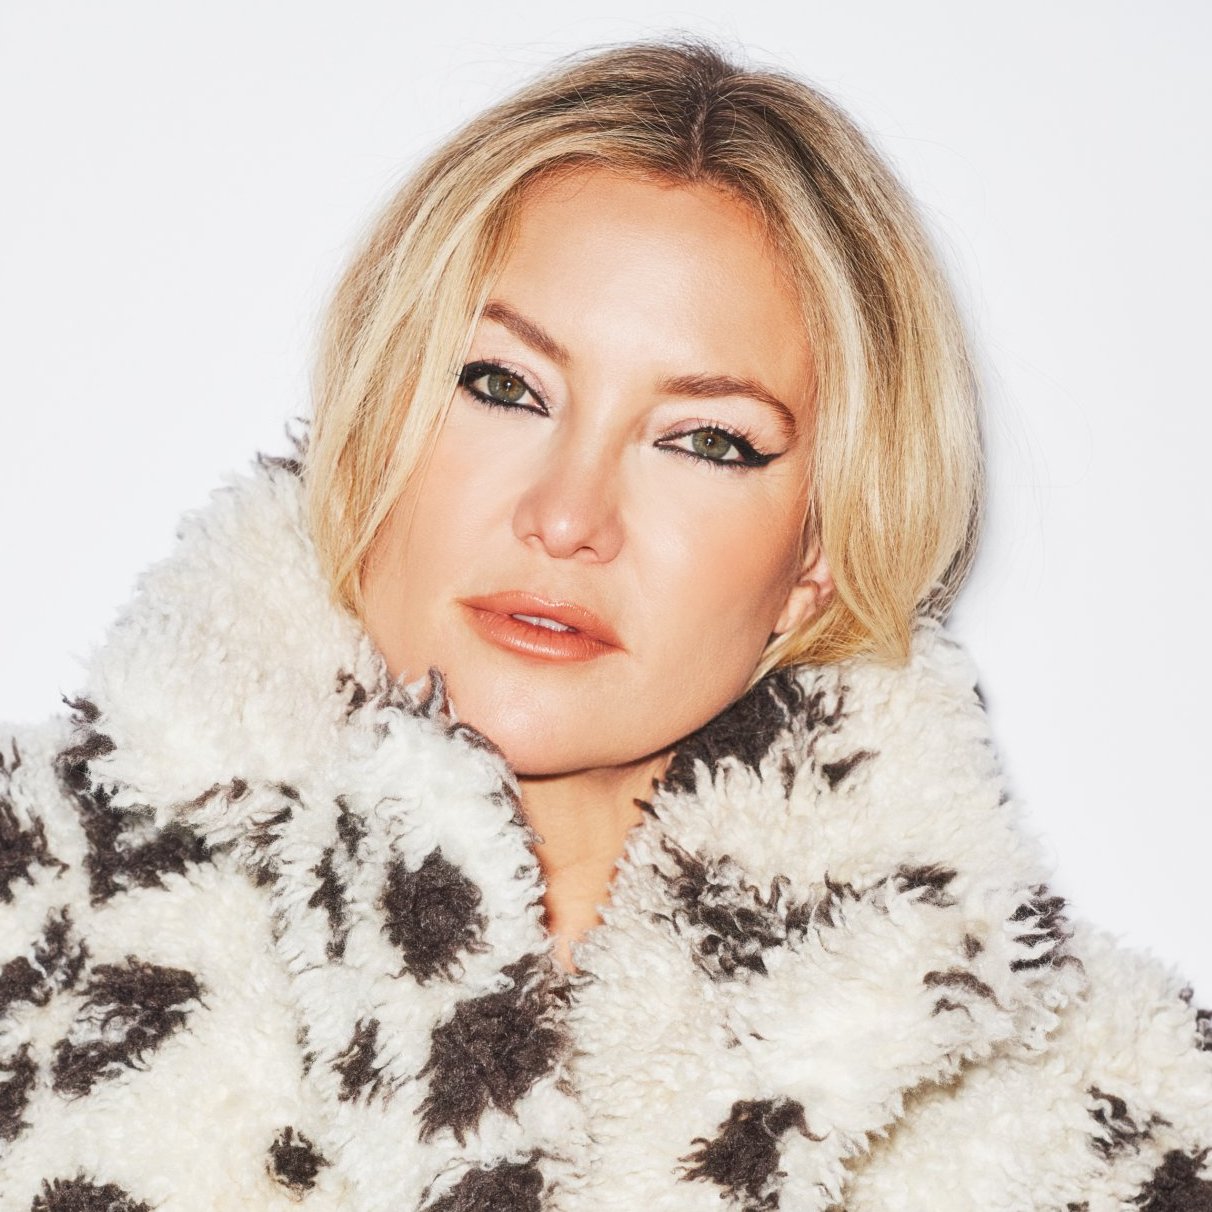 Kate Hudson delivers a serviceable impression of someone giving it her all